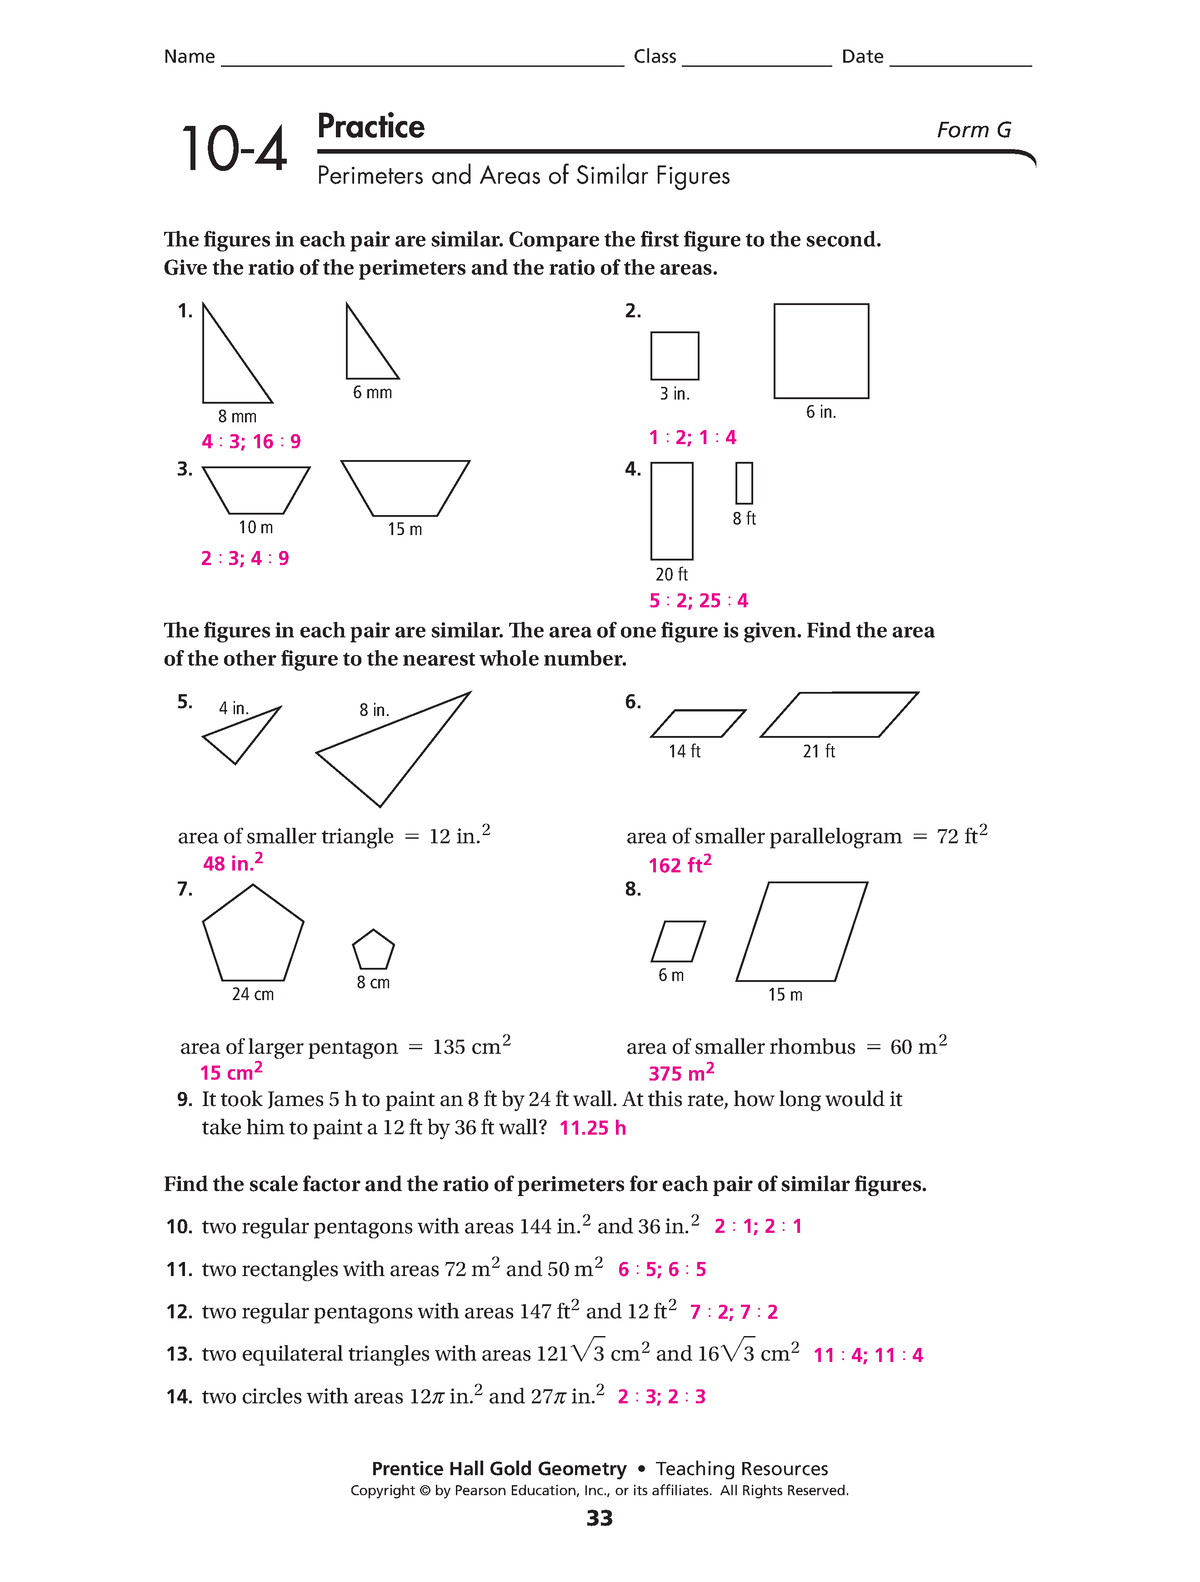 Worksheet 10.4 Form G for both CP and Honors answers - ME2033 ...